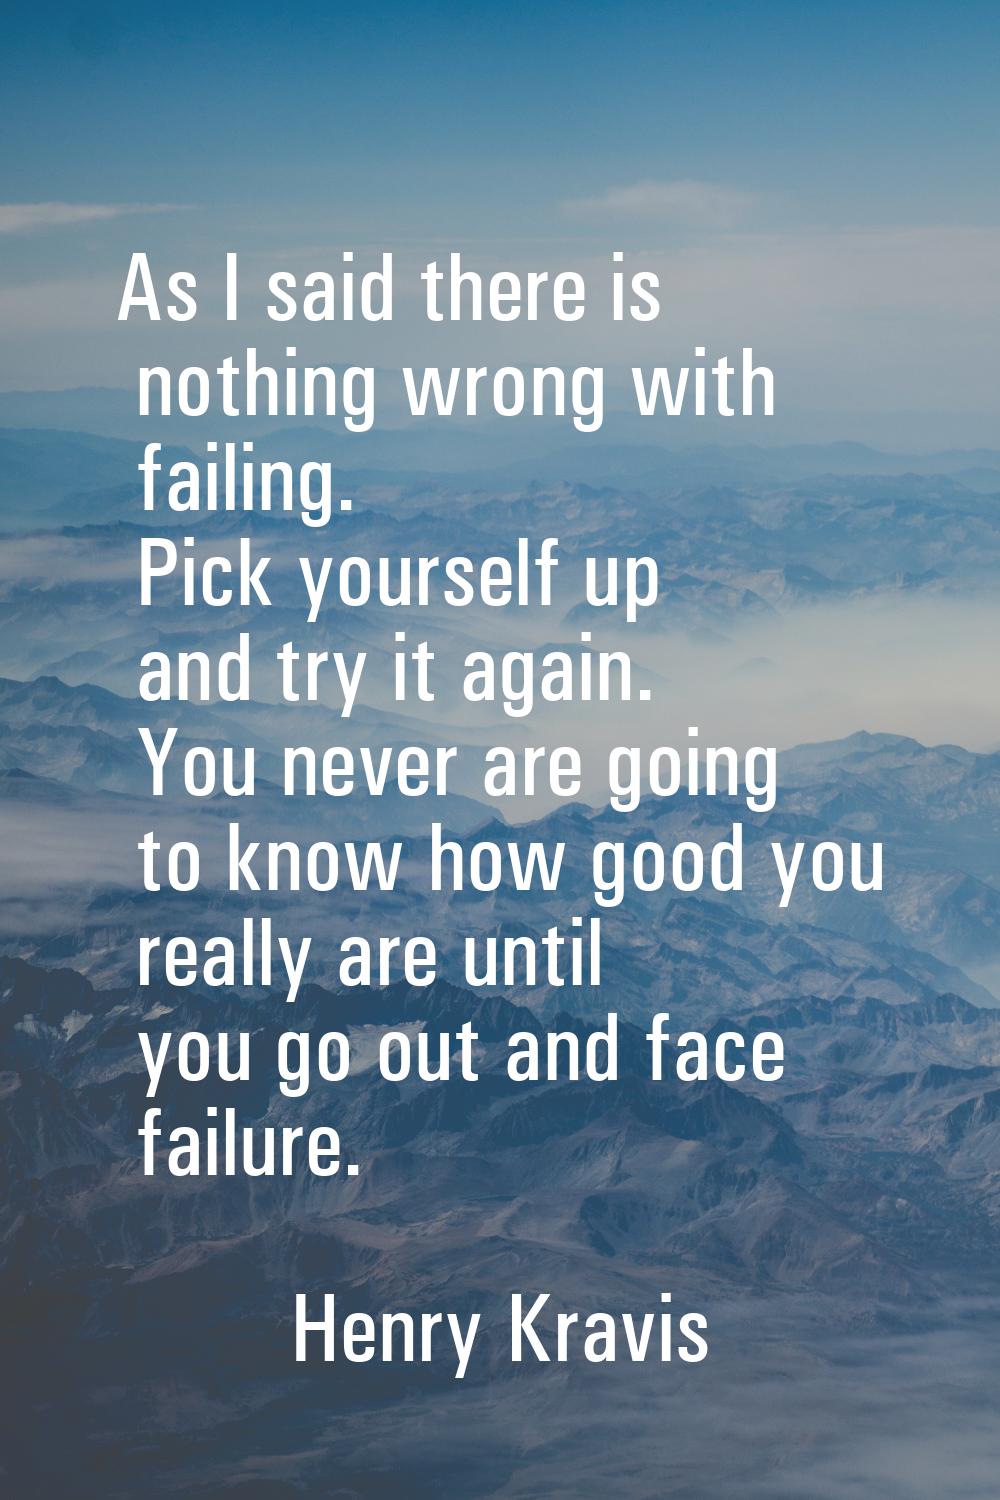 As I said there is nothing wrong with failing. Pick yourself up and try it again. You never are goi